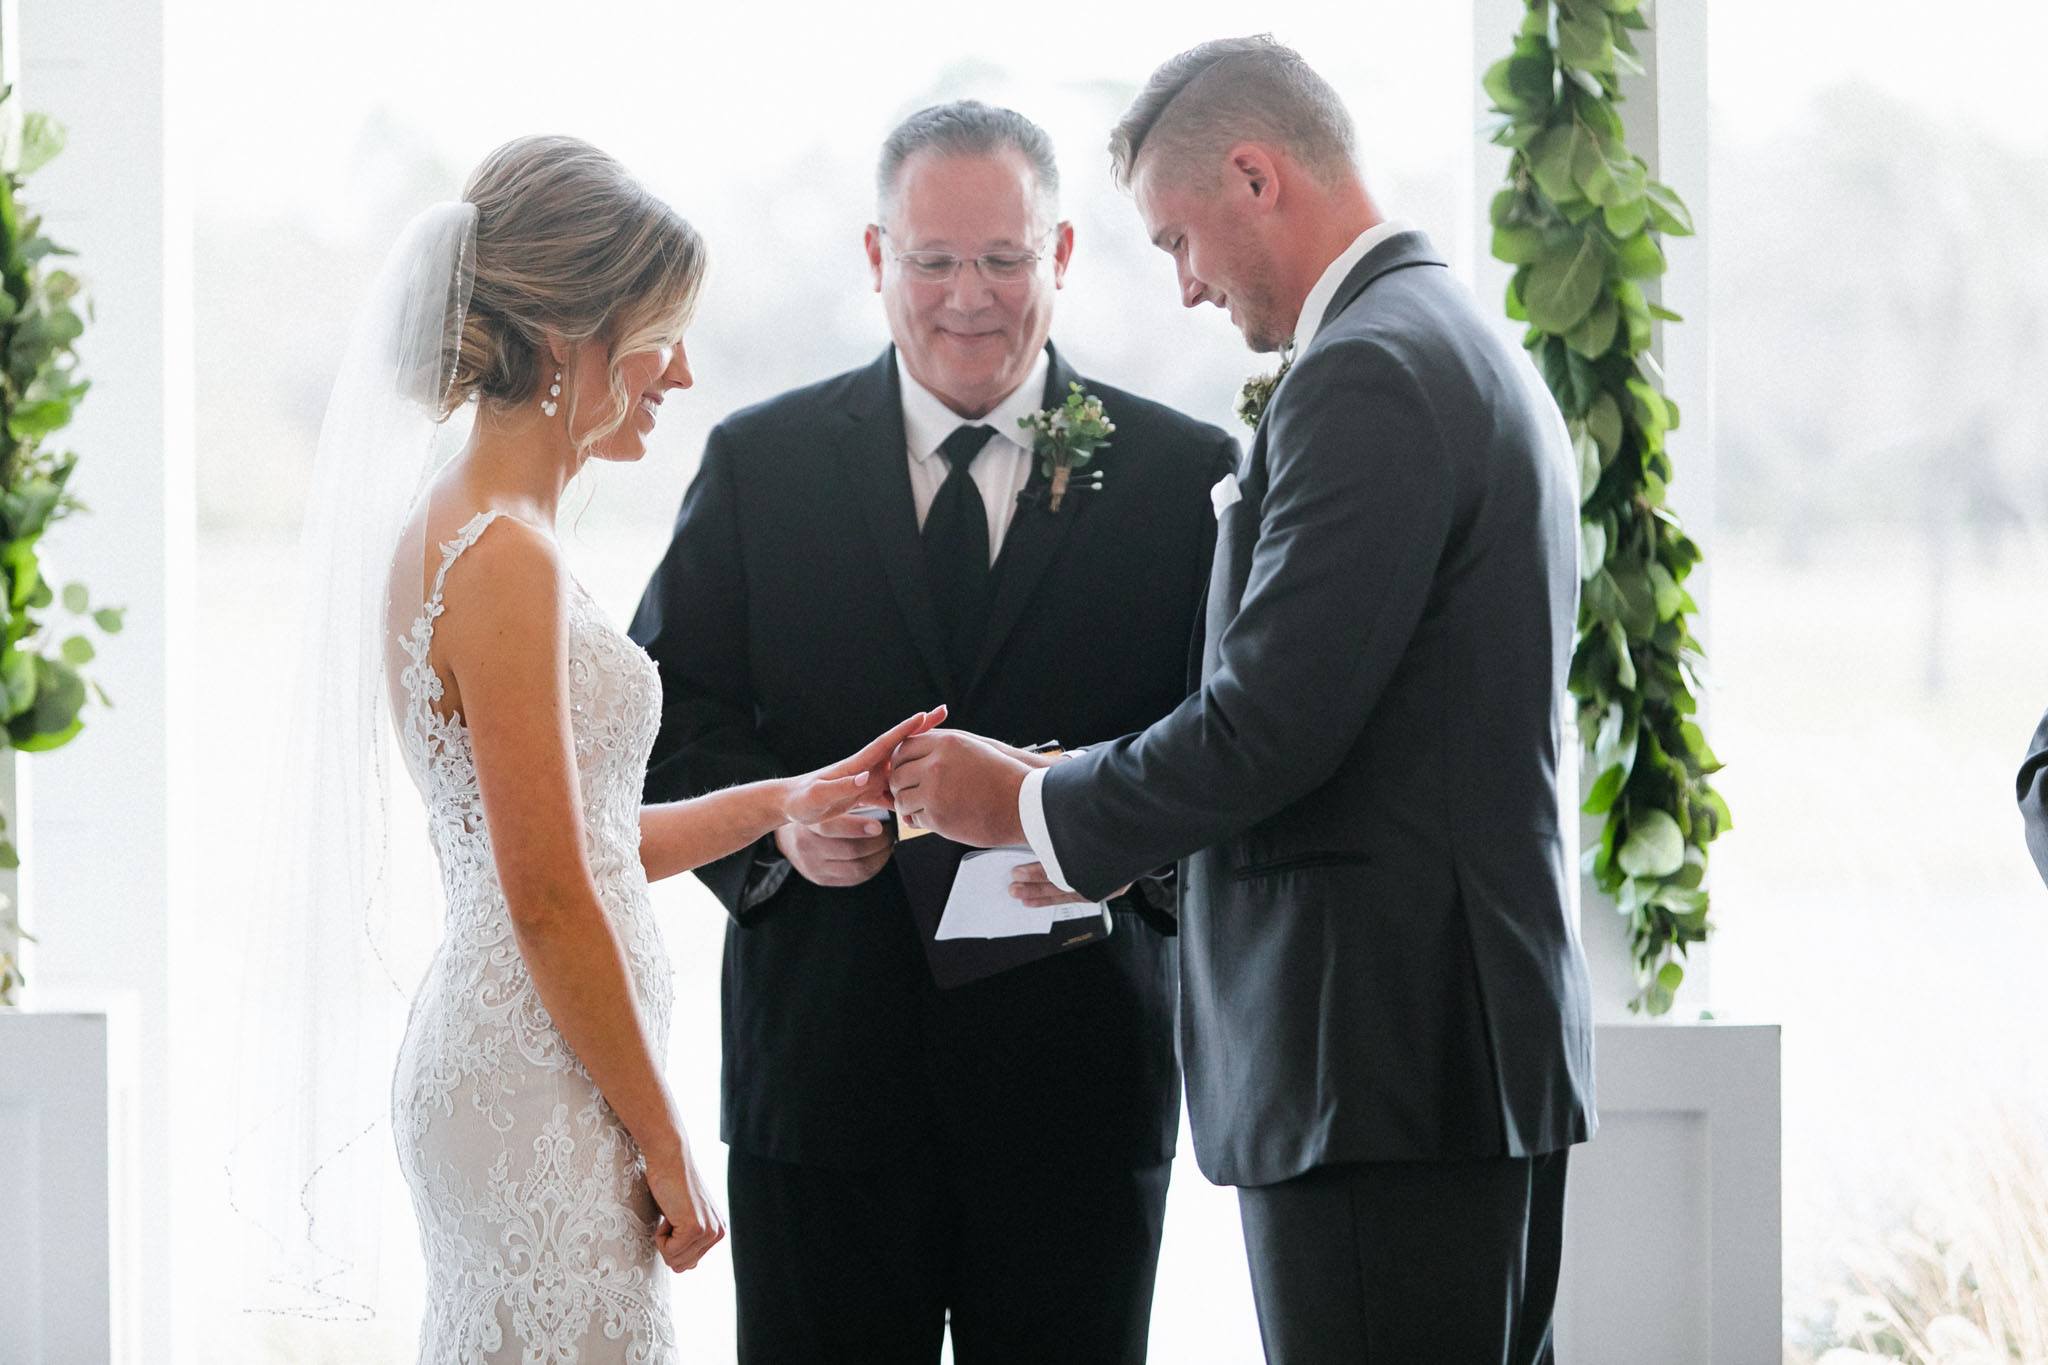 Traditional vs. Personalized Wedding Vows